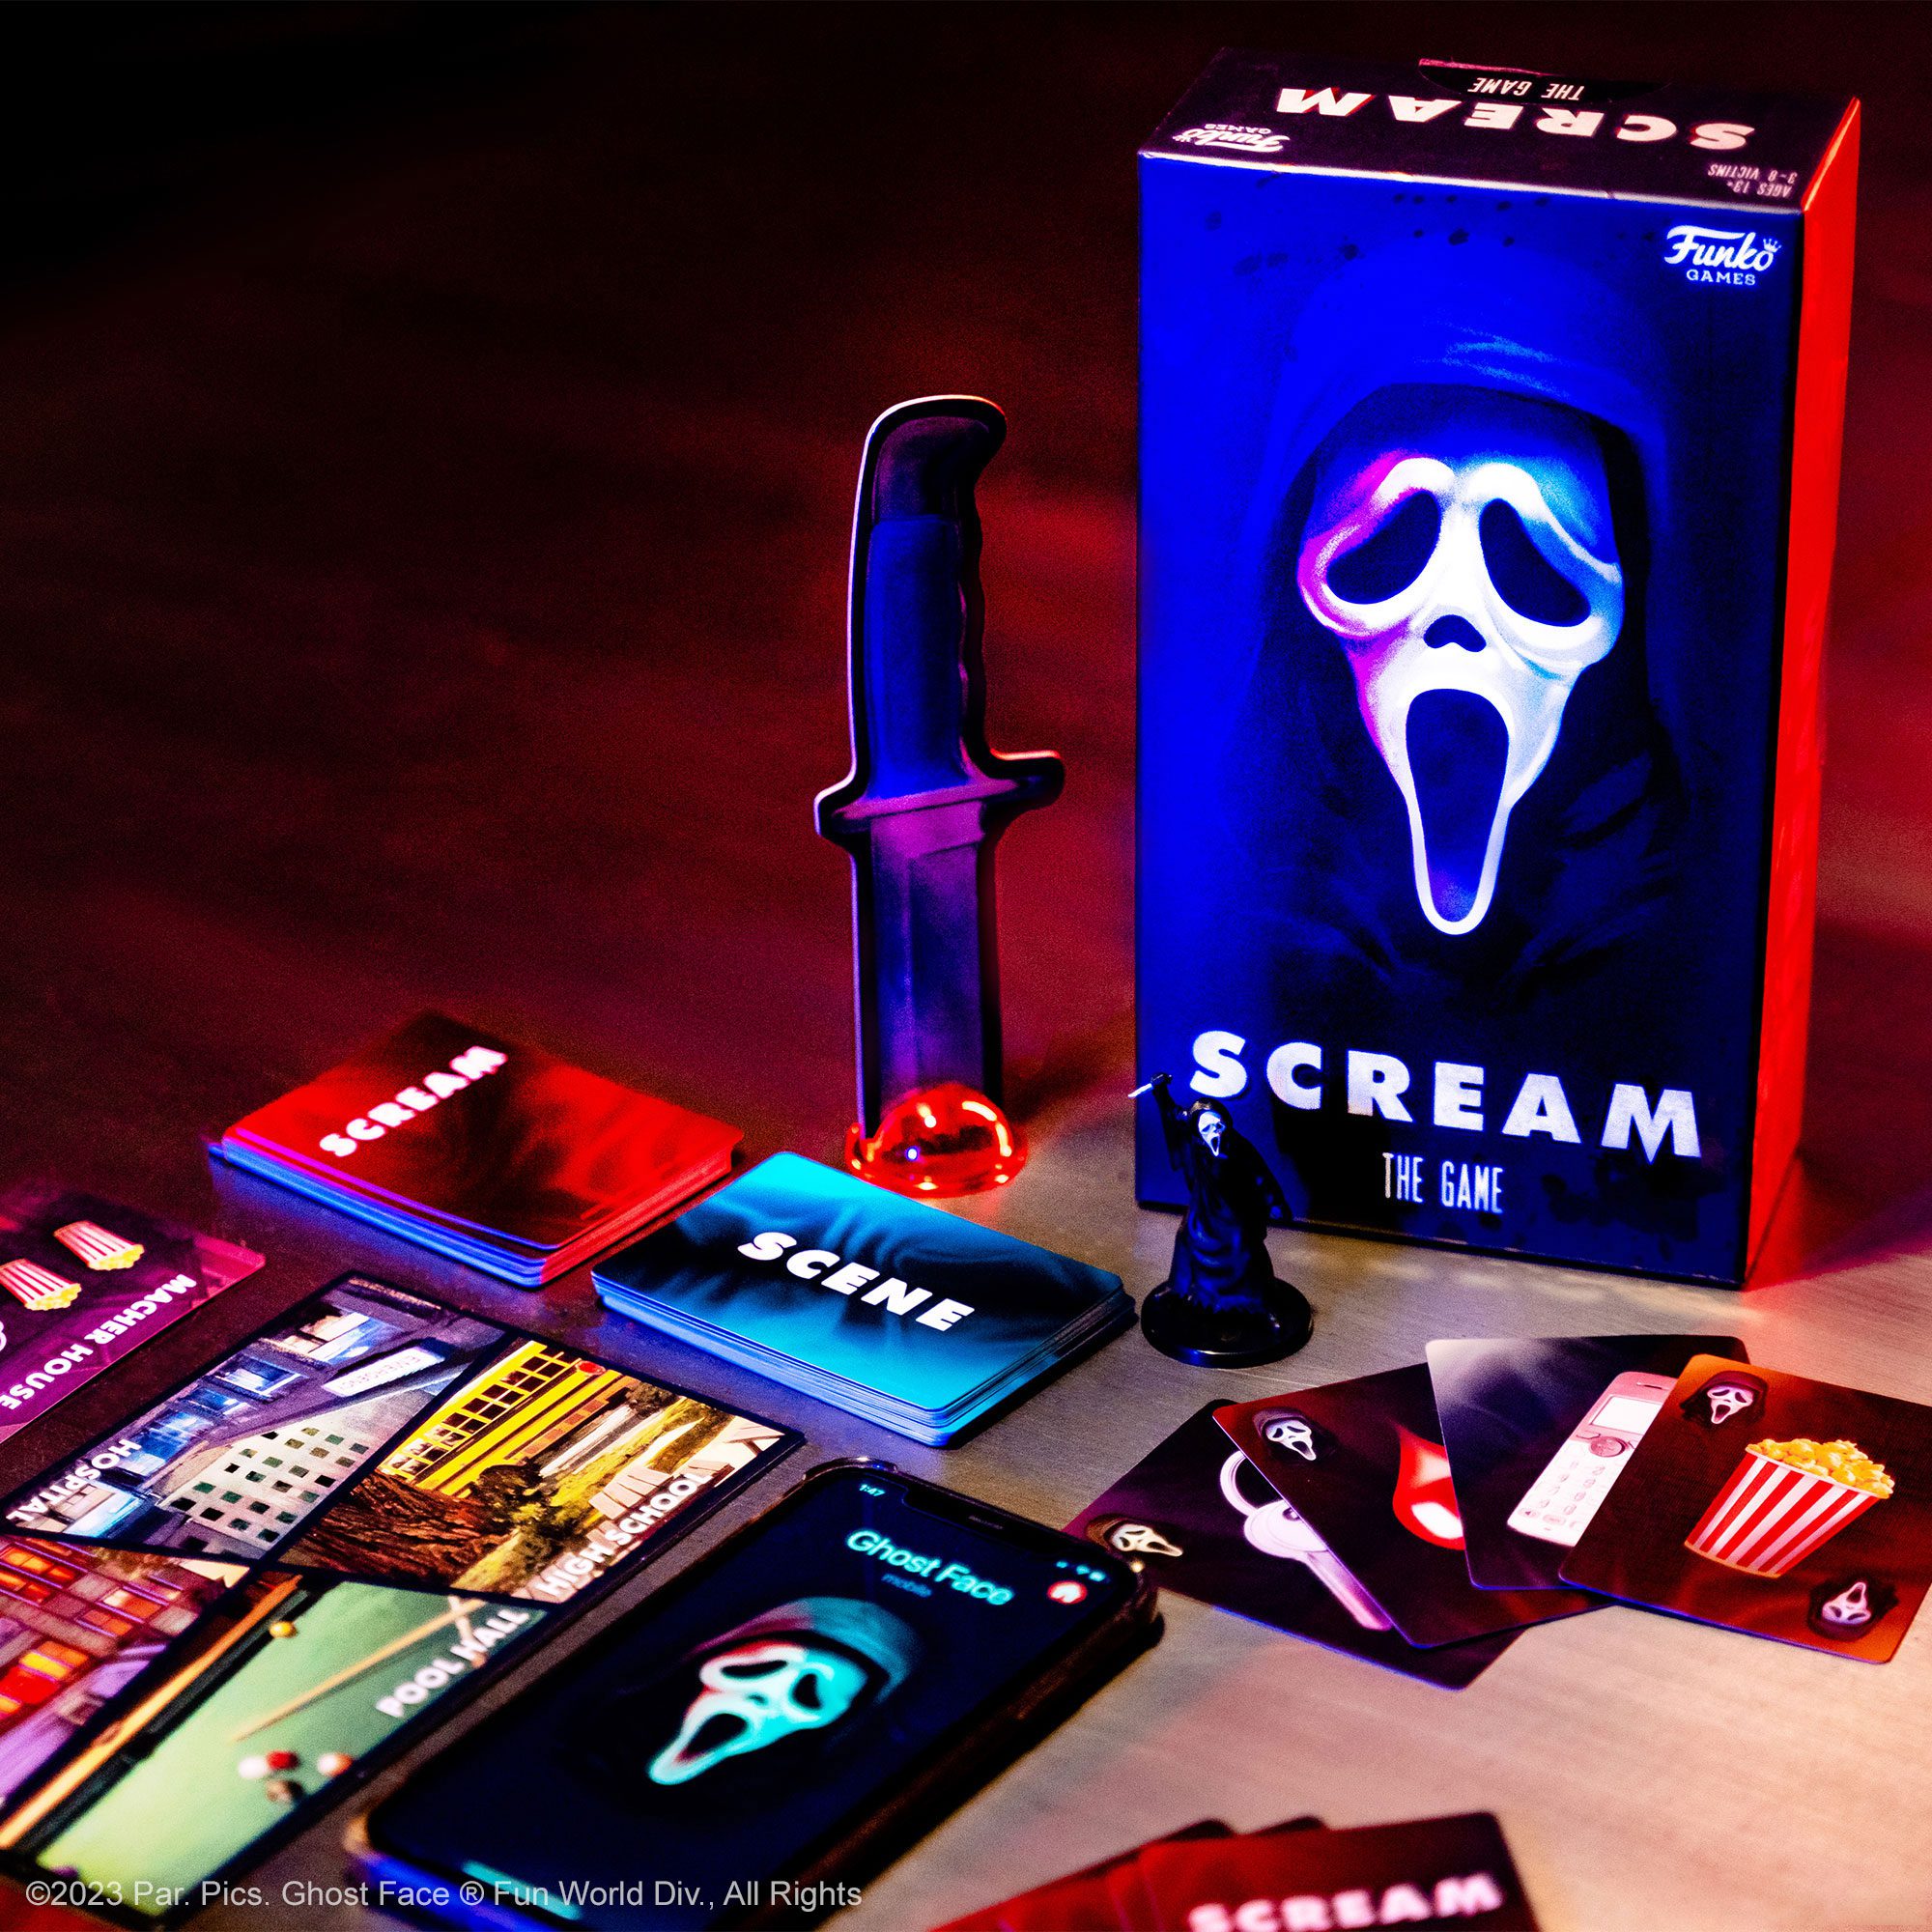 Scream The Game contents